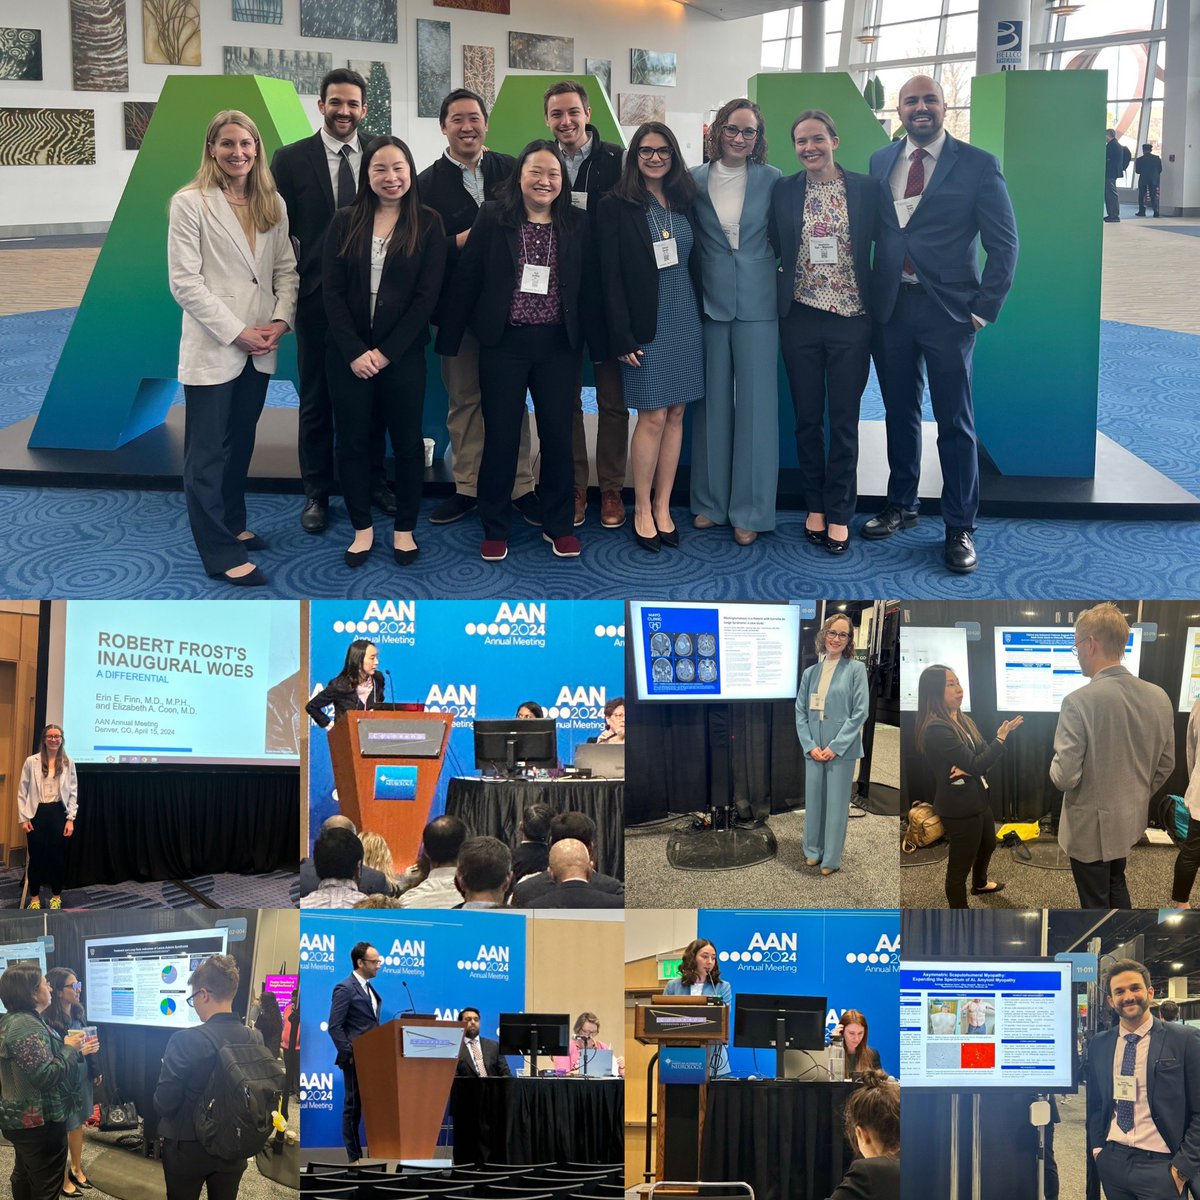 Well, that was fun! So impressed by all that took place at #AANAM and the incredible @AANmember staff. Also, look at some of the great work by @mayoneurores!